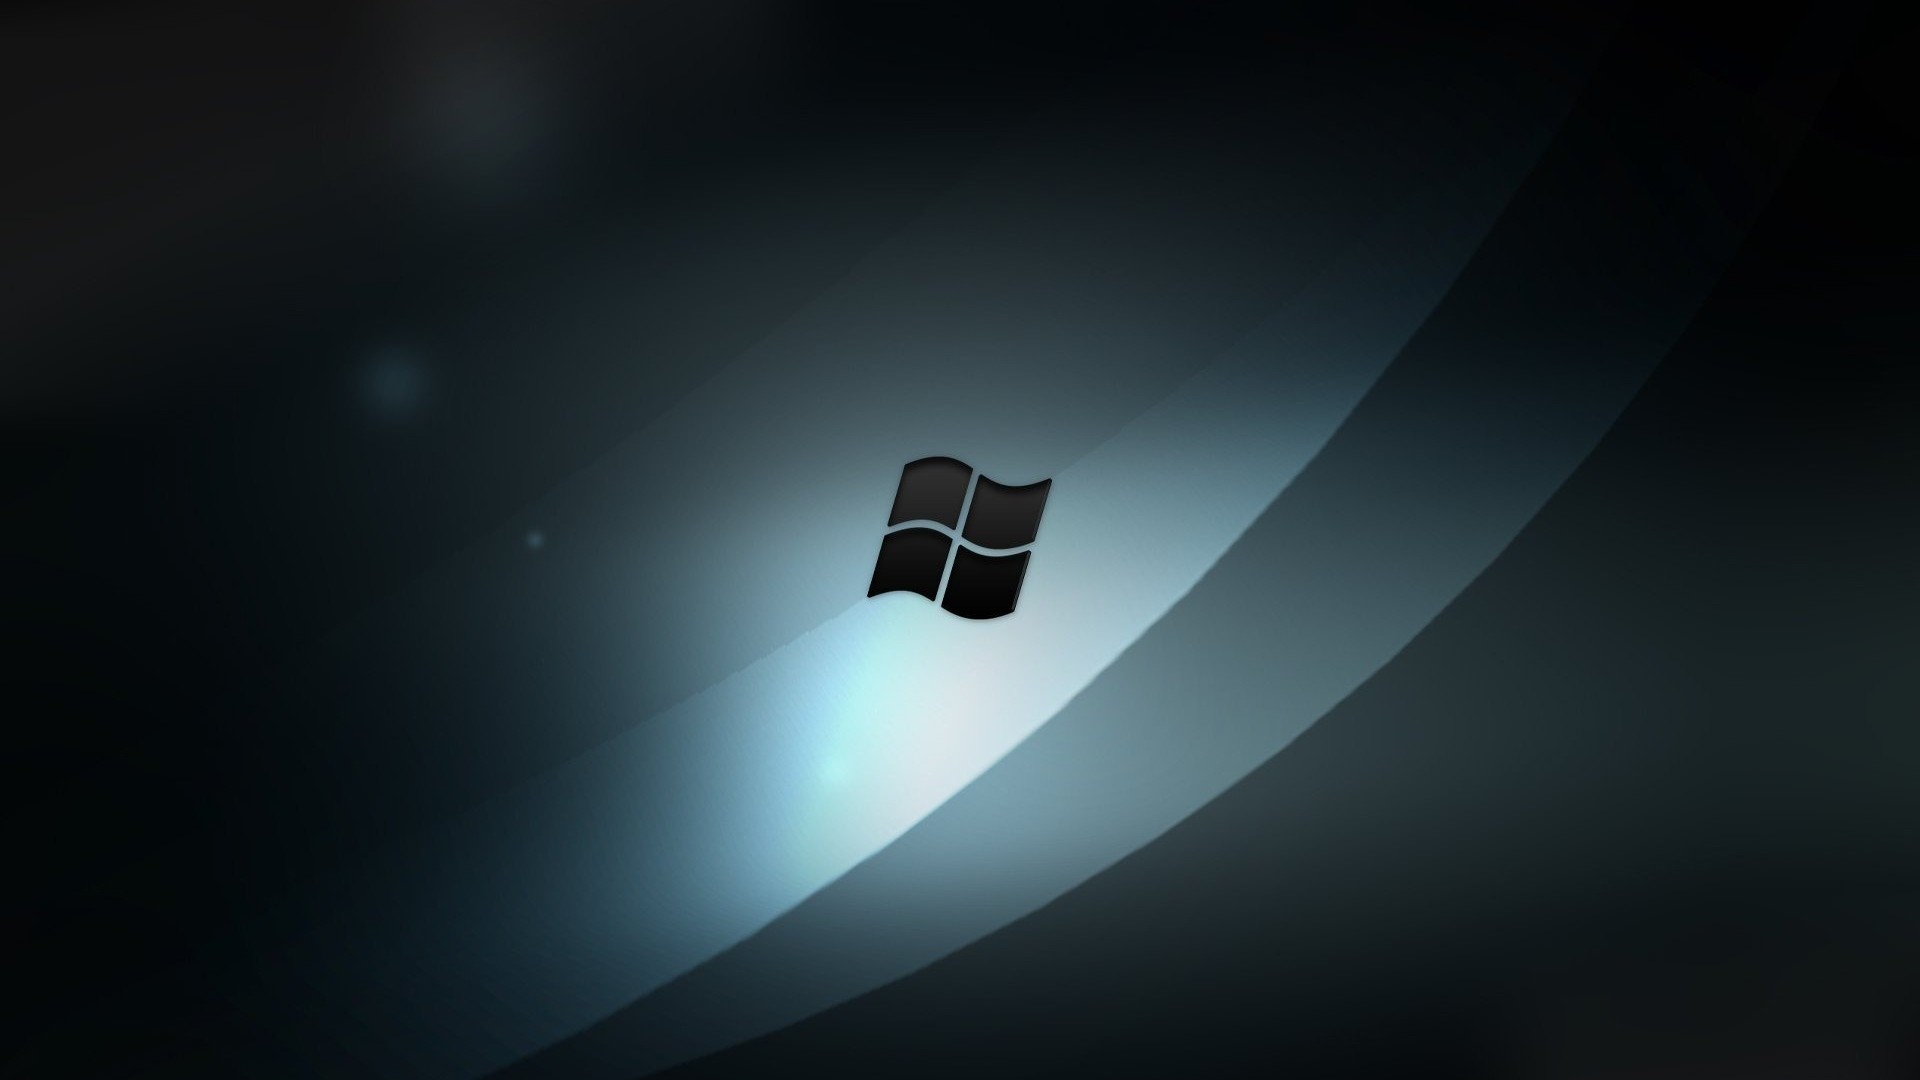 1920x1080 Windows 7 Ultimate Wallpapers HD - Wallpaper Cave ...